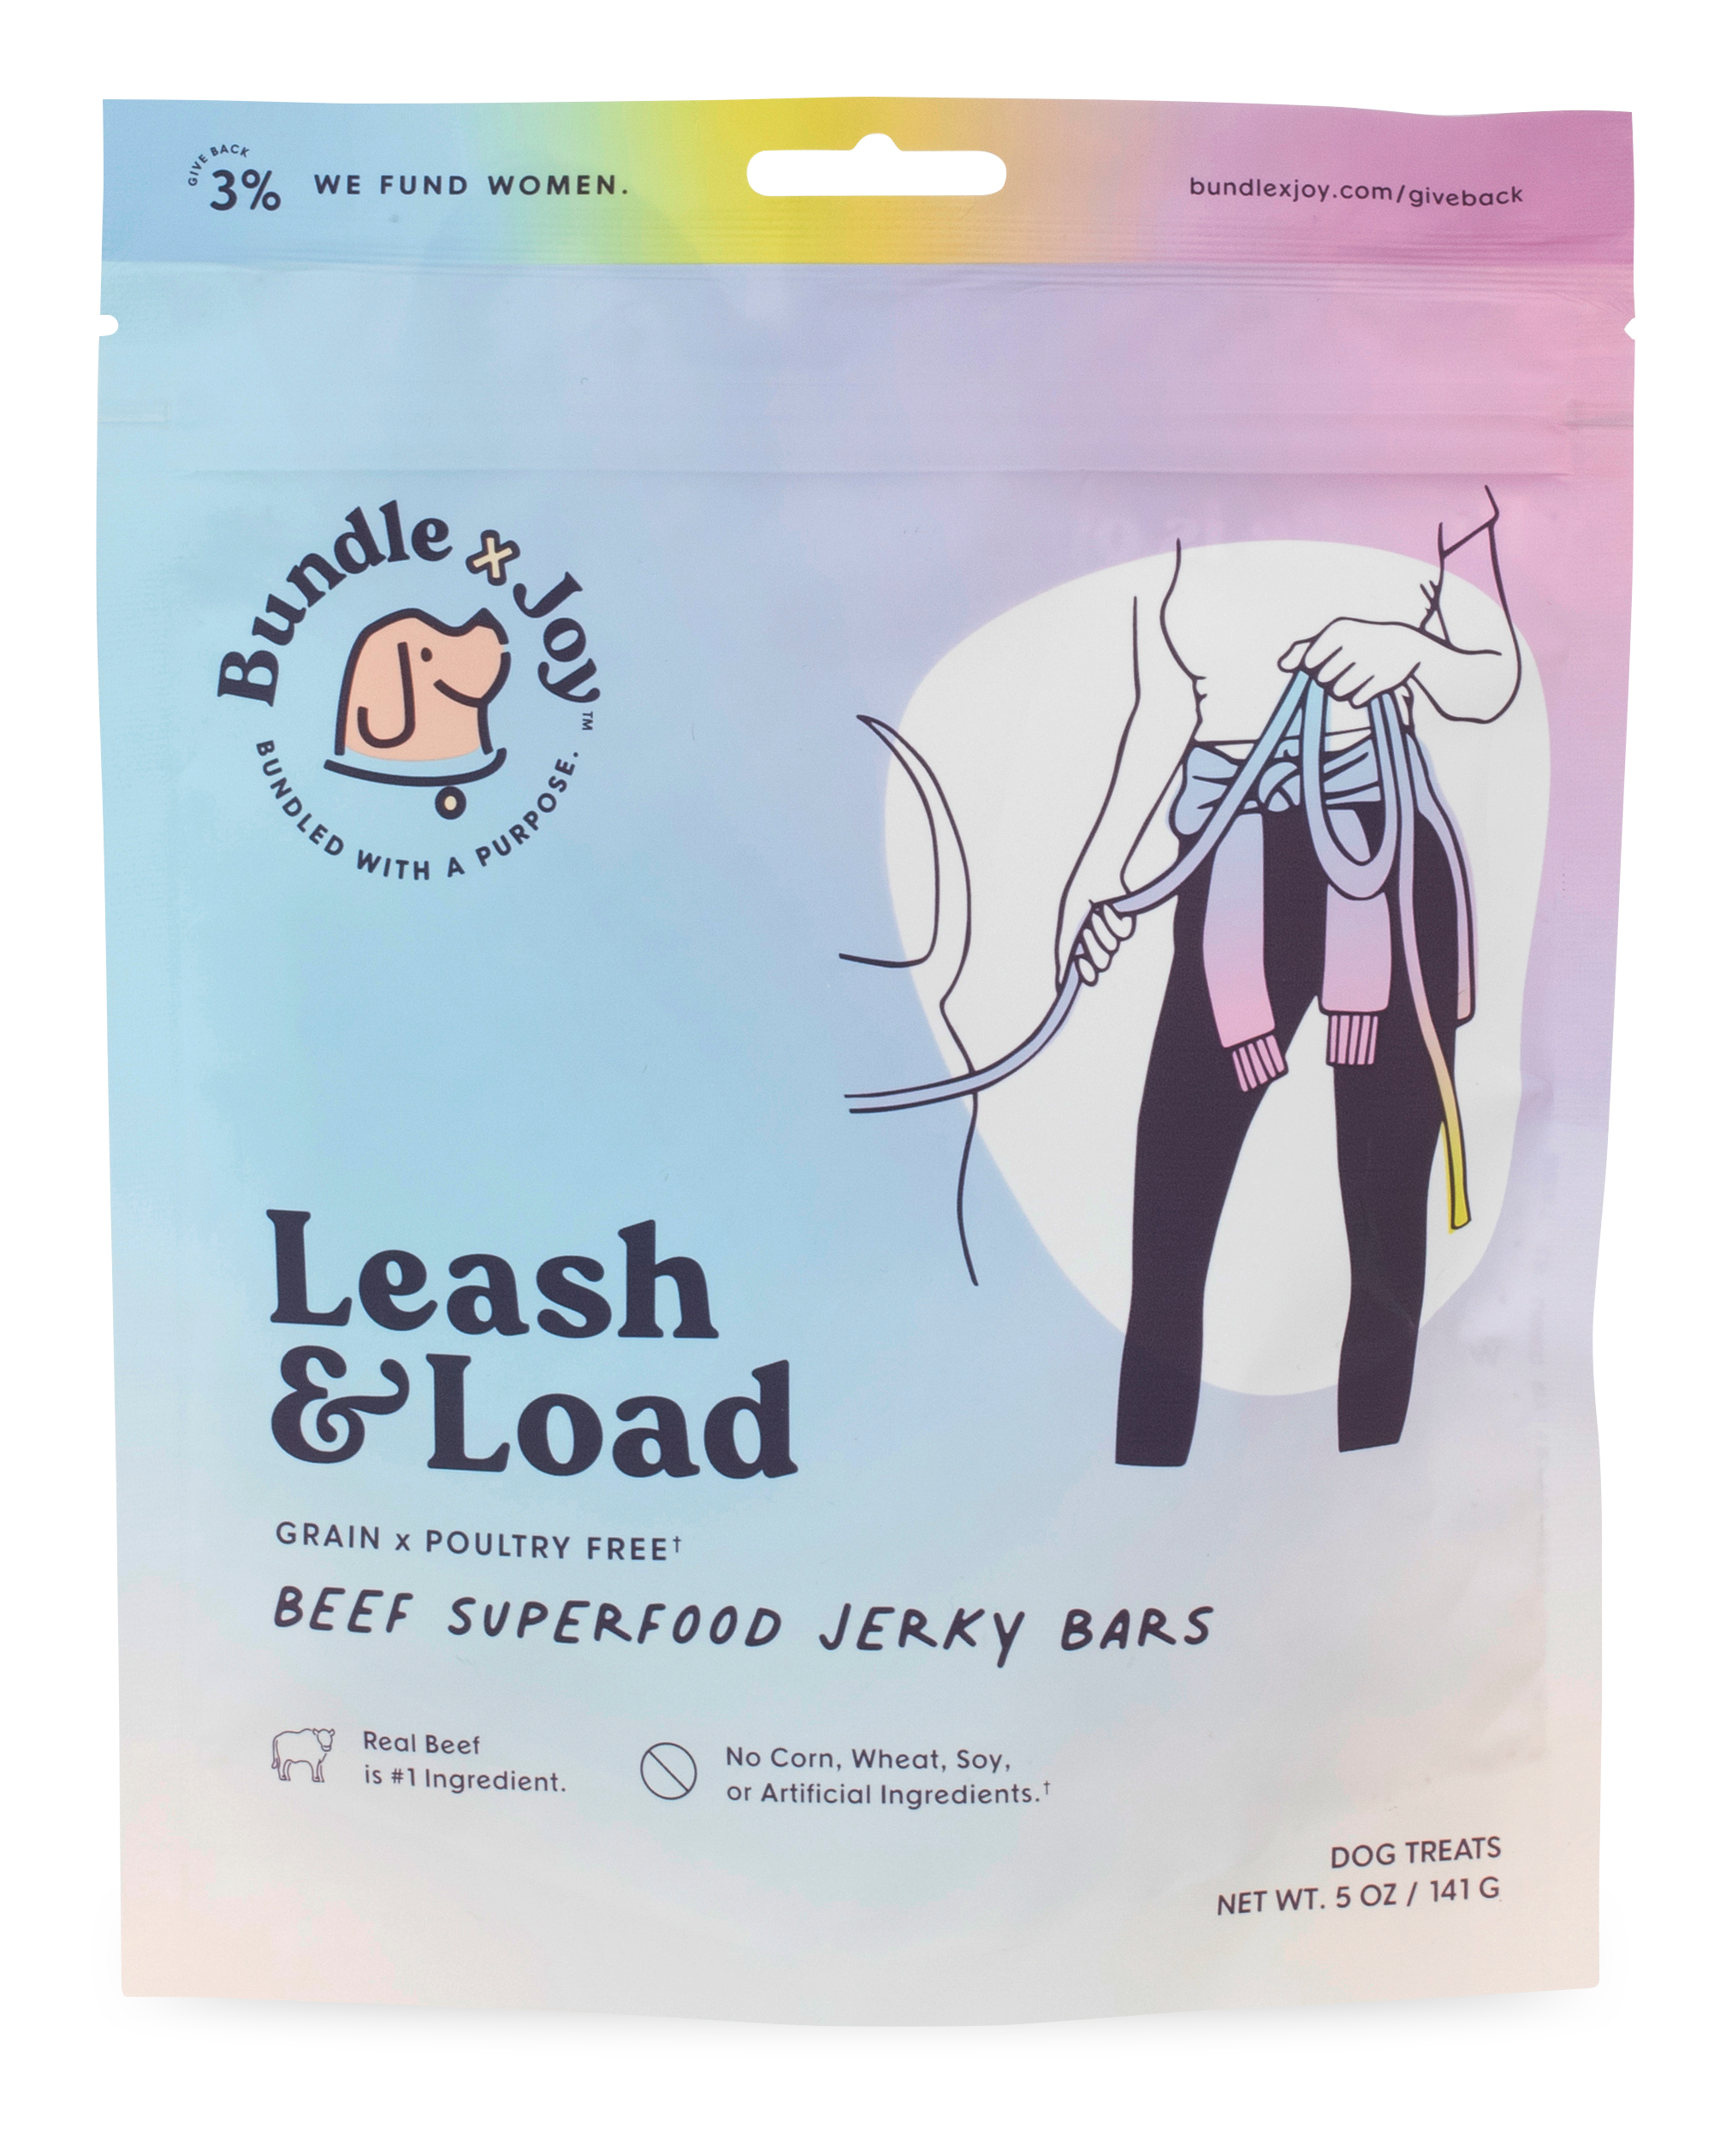 Leash & Load Beef Superfood Jerky Bars for Dogs: 5oz